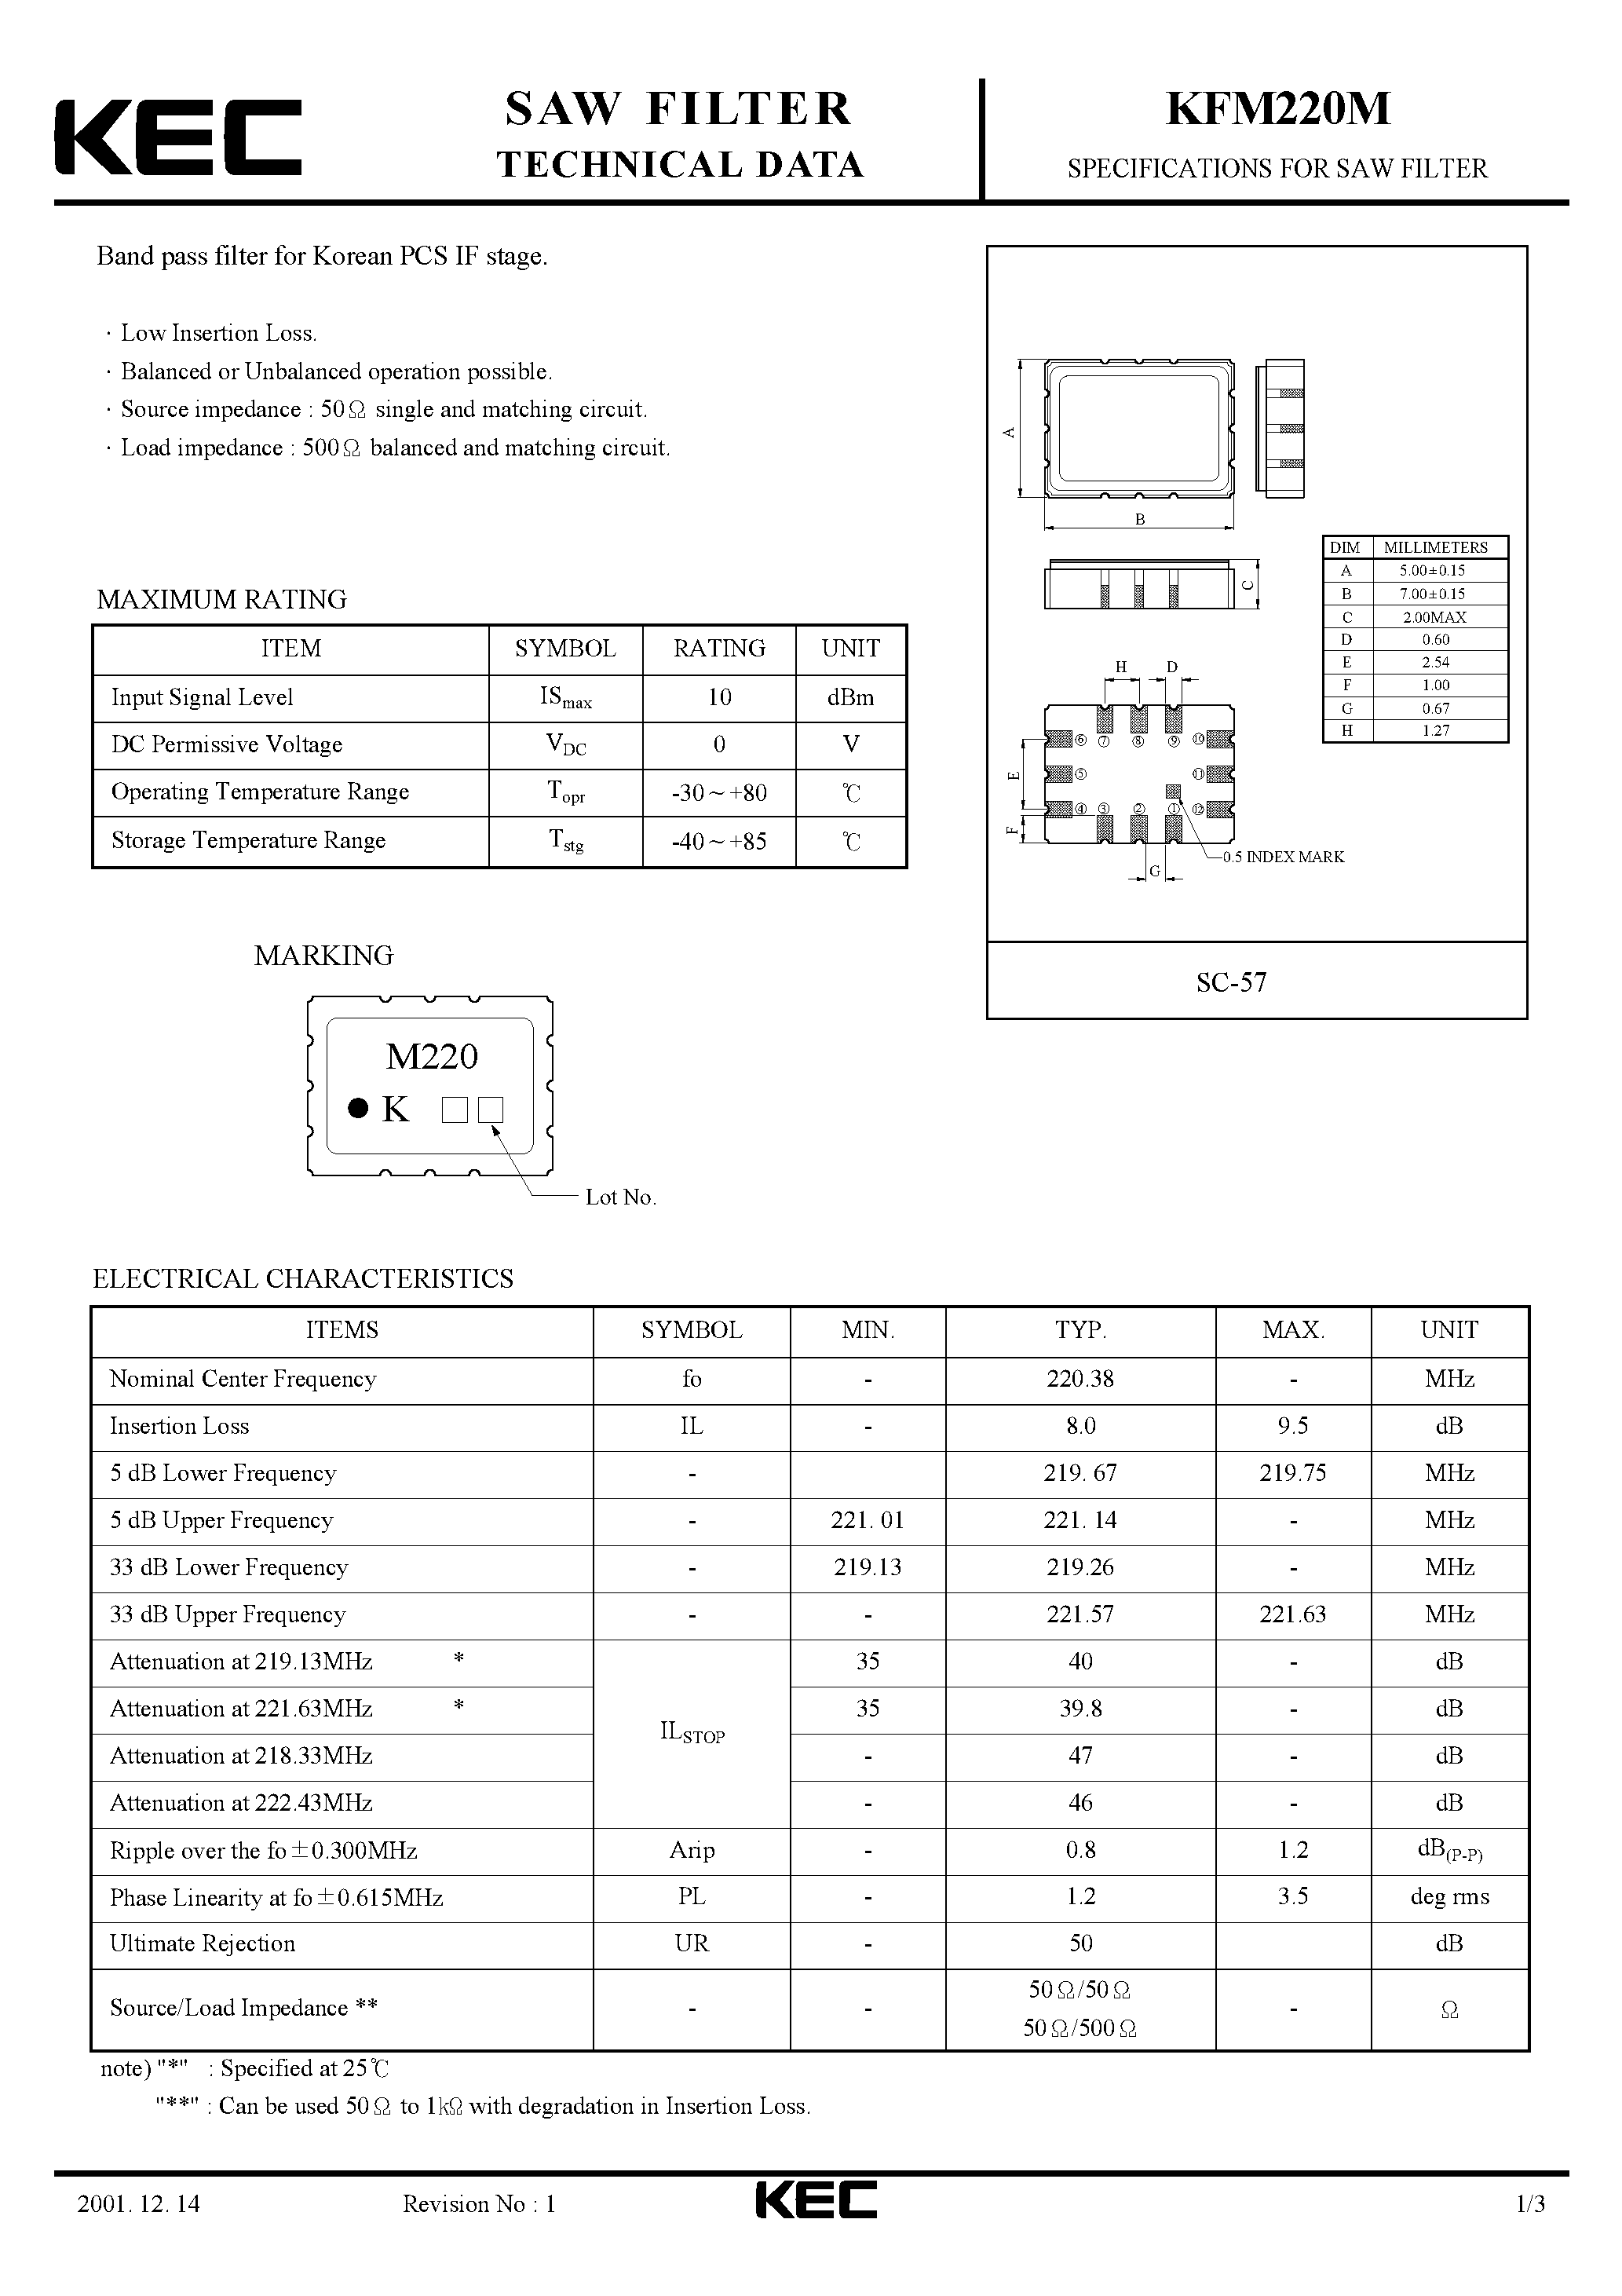 Даташит KFM220M - SPECIFICATIONS FOR SAW FILTER(BAND PASS FILTERS FOR KOREAN PCS IF STAGE) страница 1